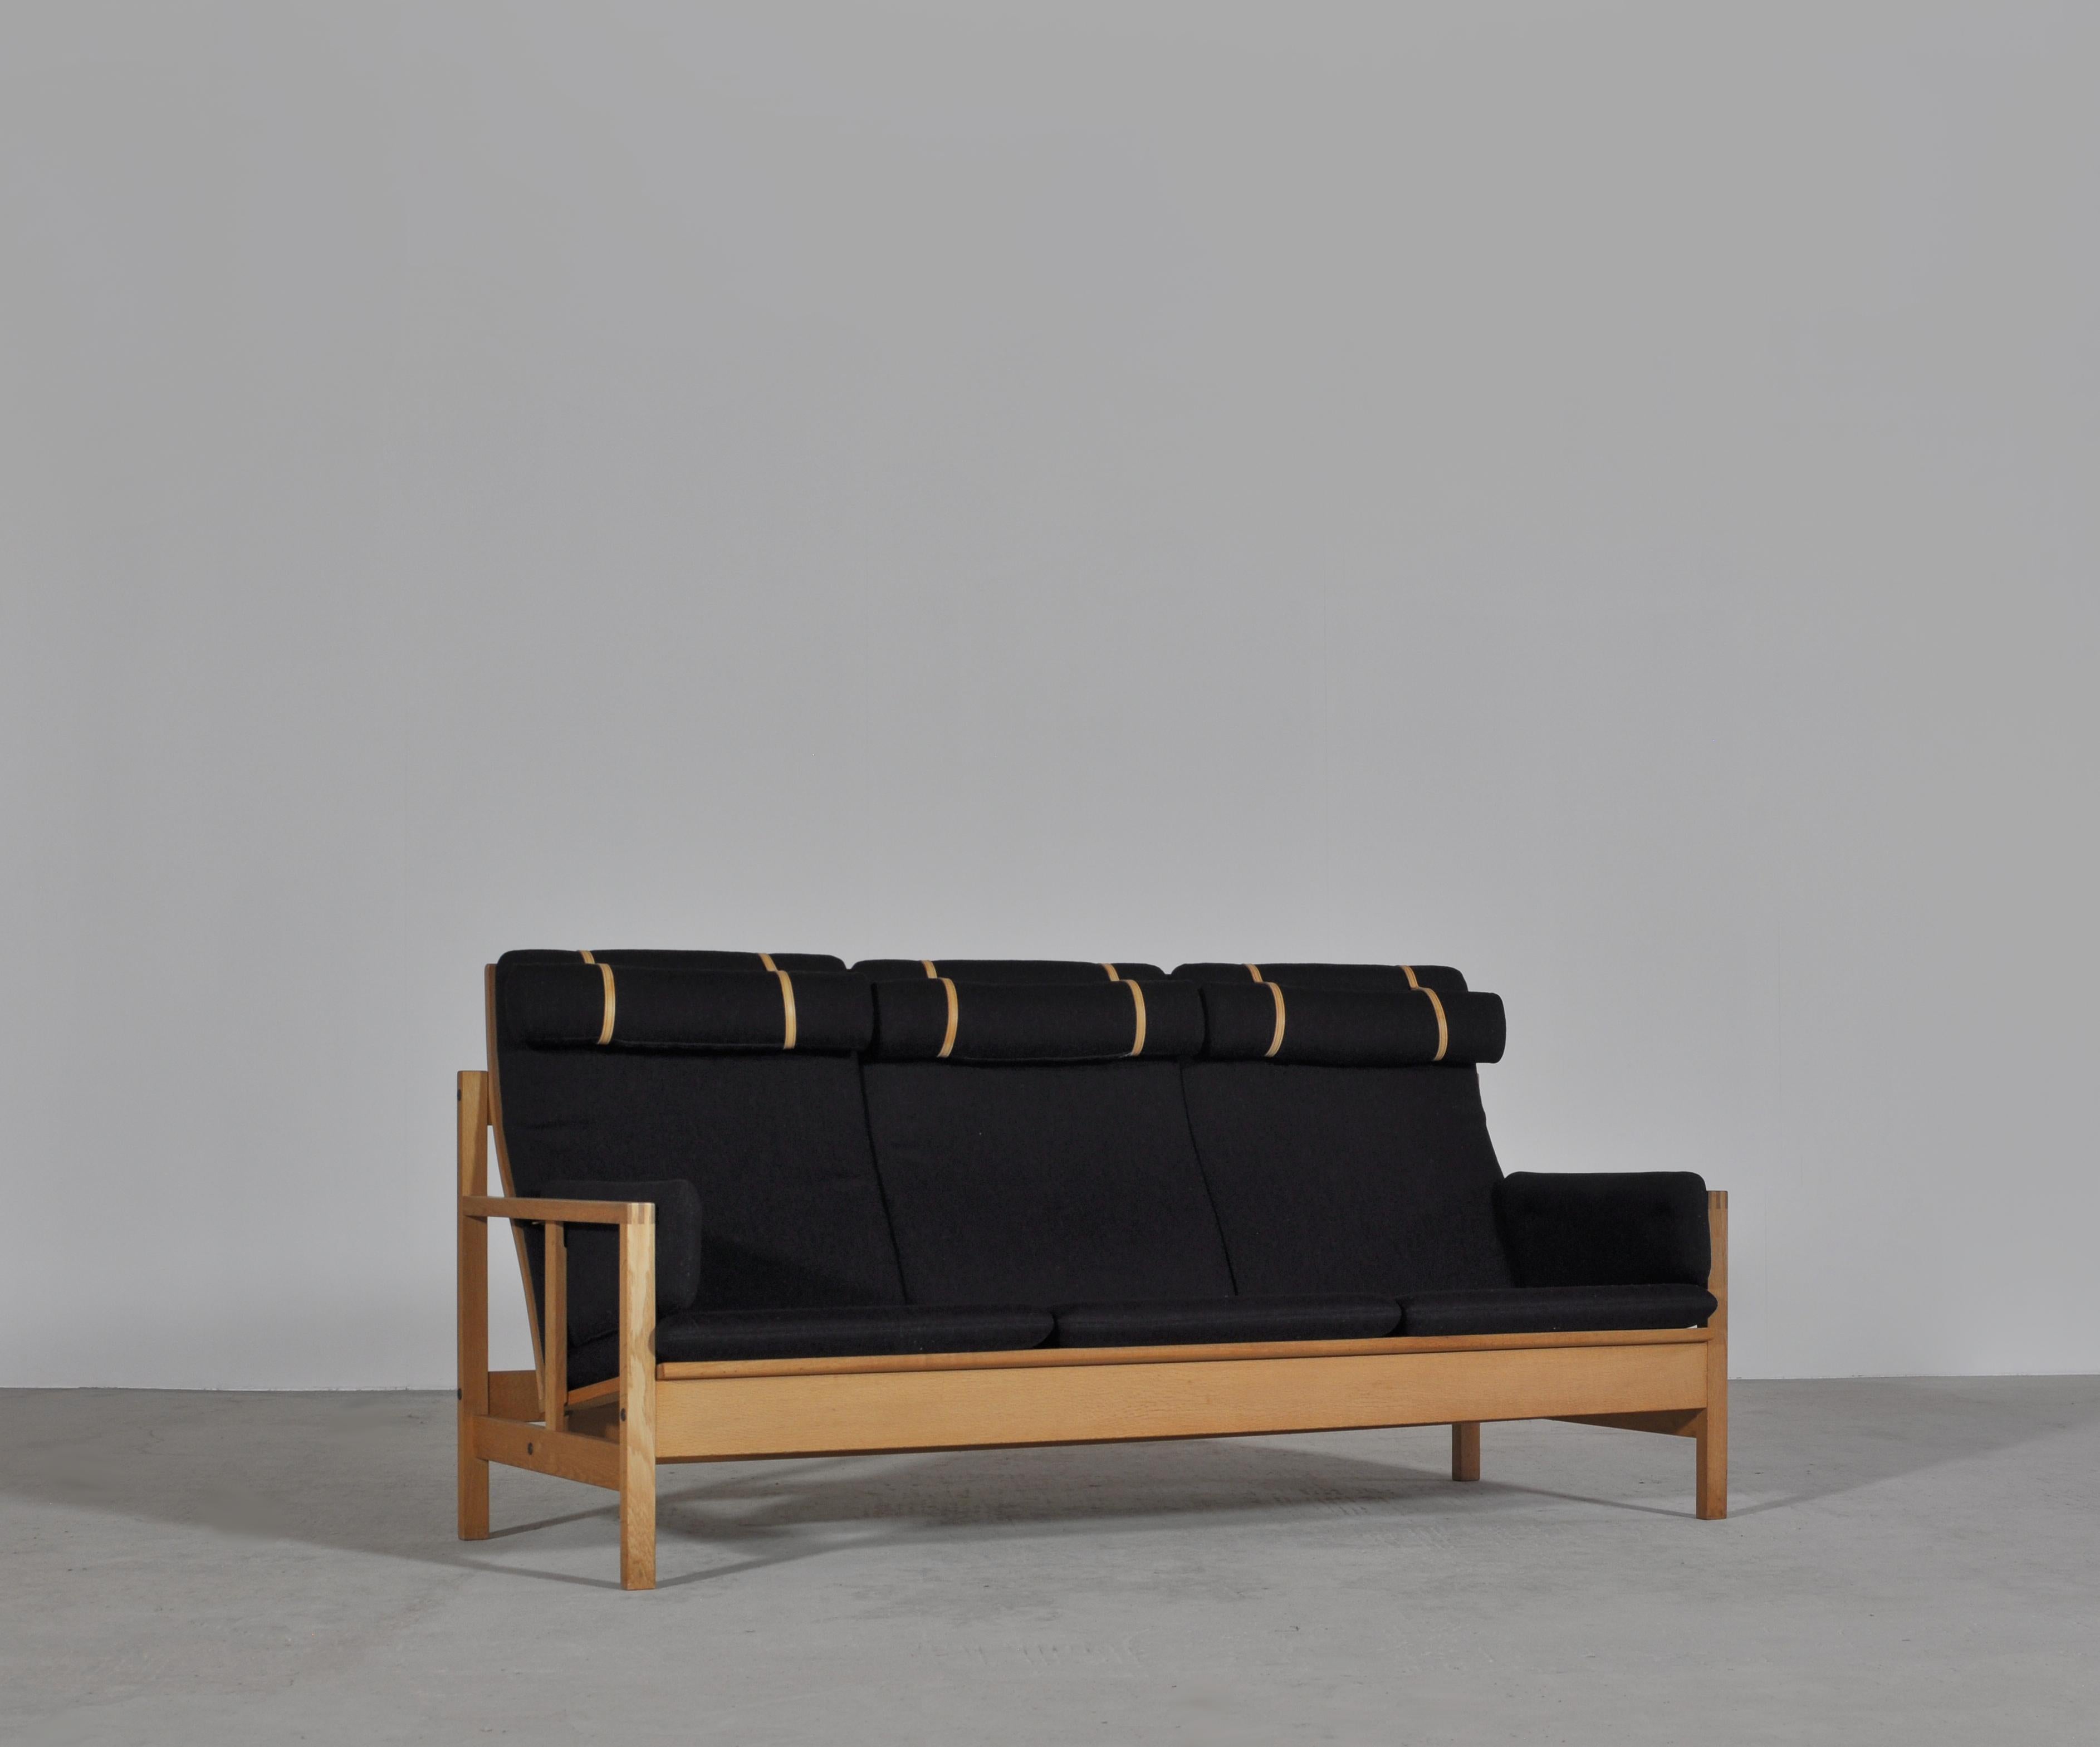 Beautiful Børge Mogensen design from the 1960s. The sofa is made from solid oak and the loose cushions are reupholstered in black 